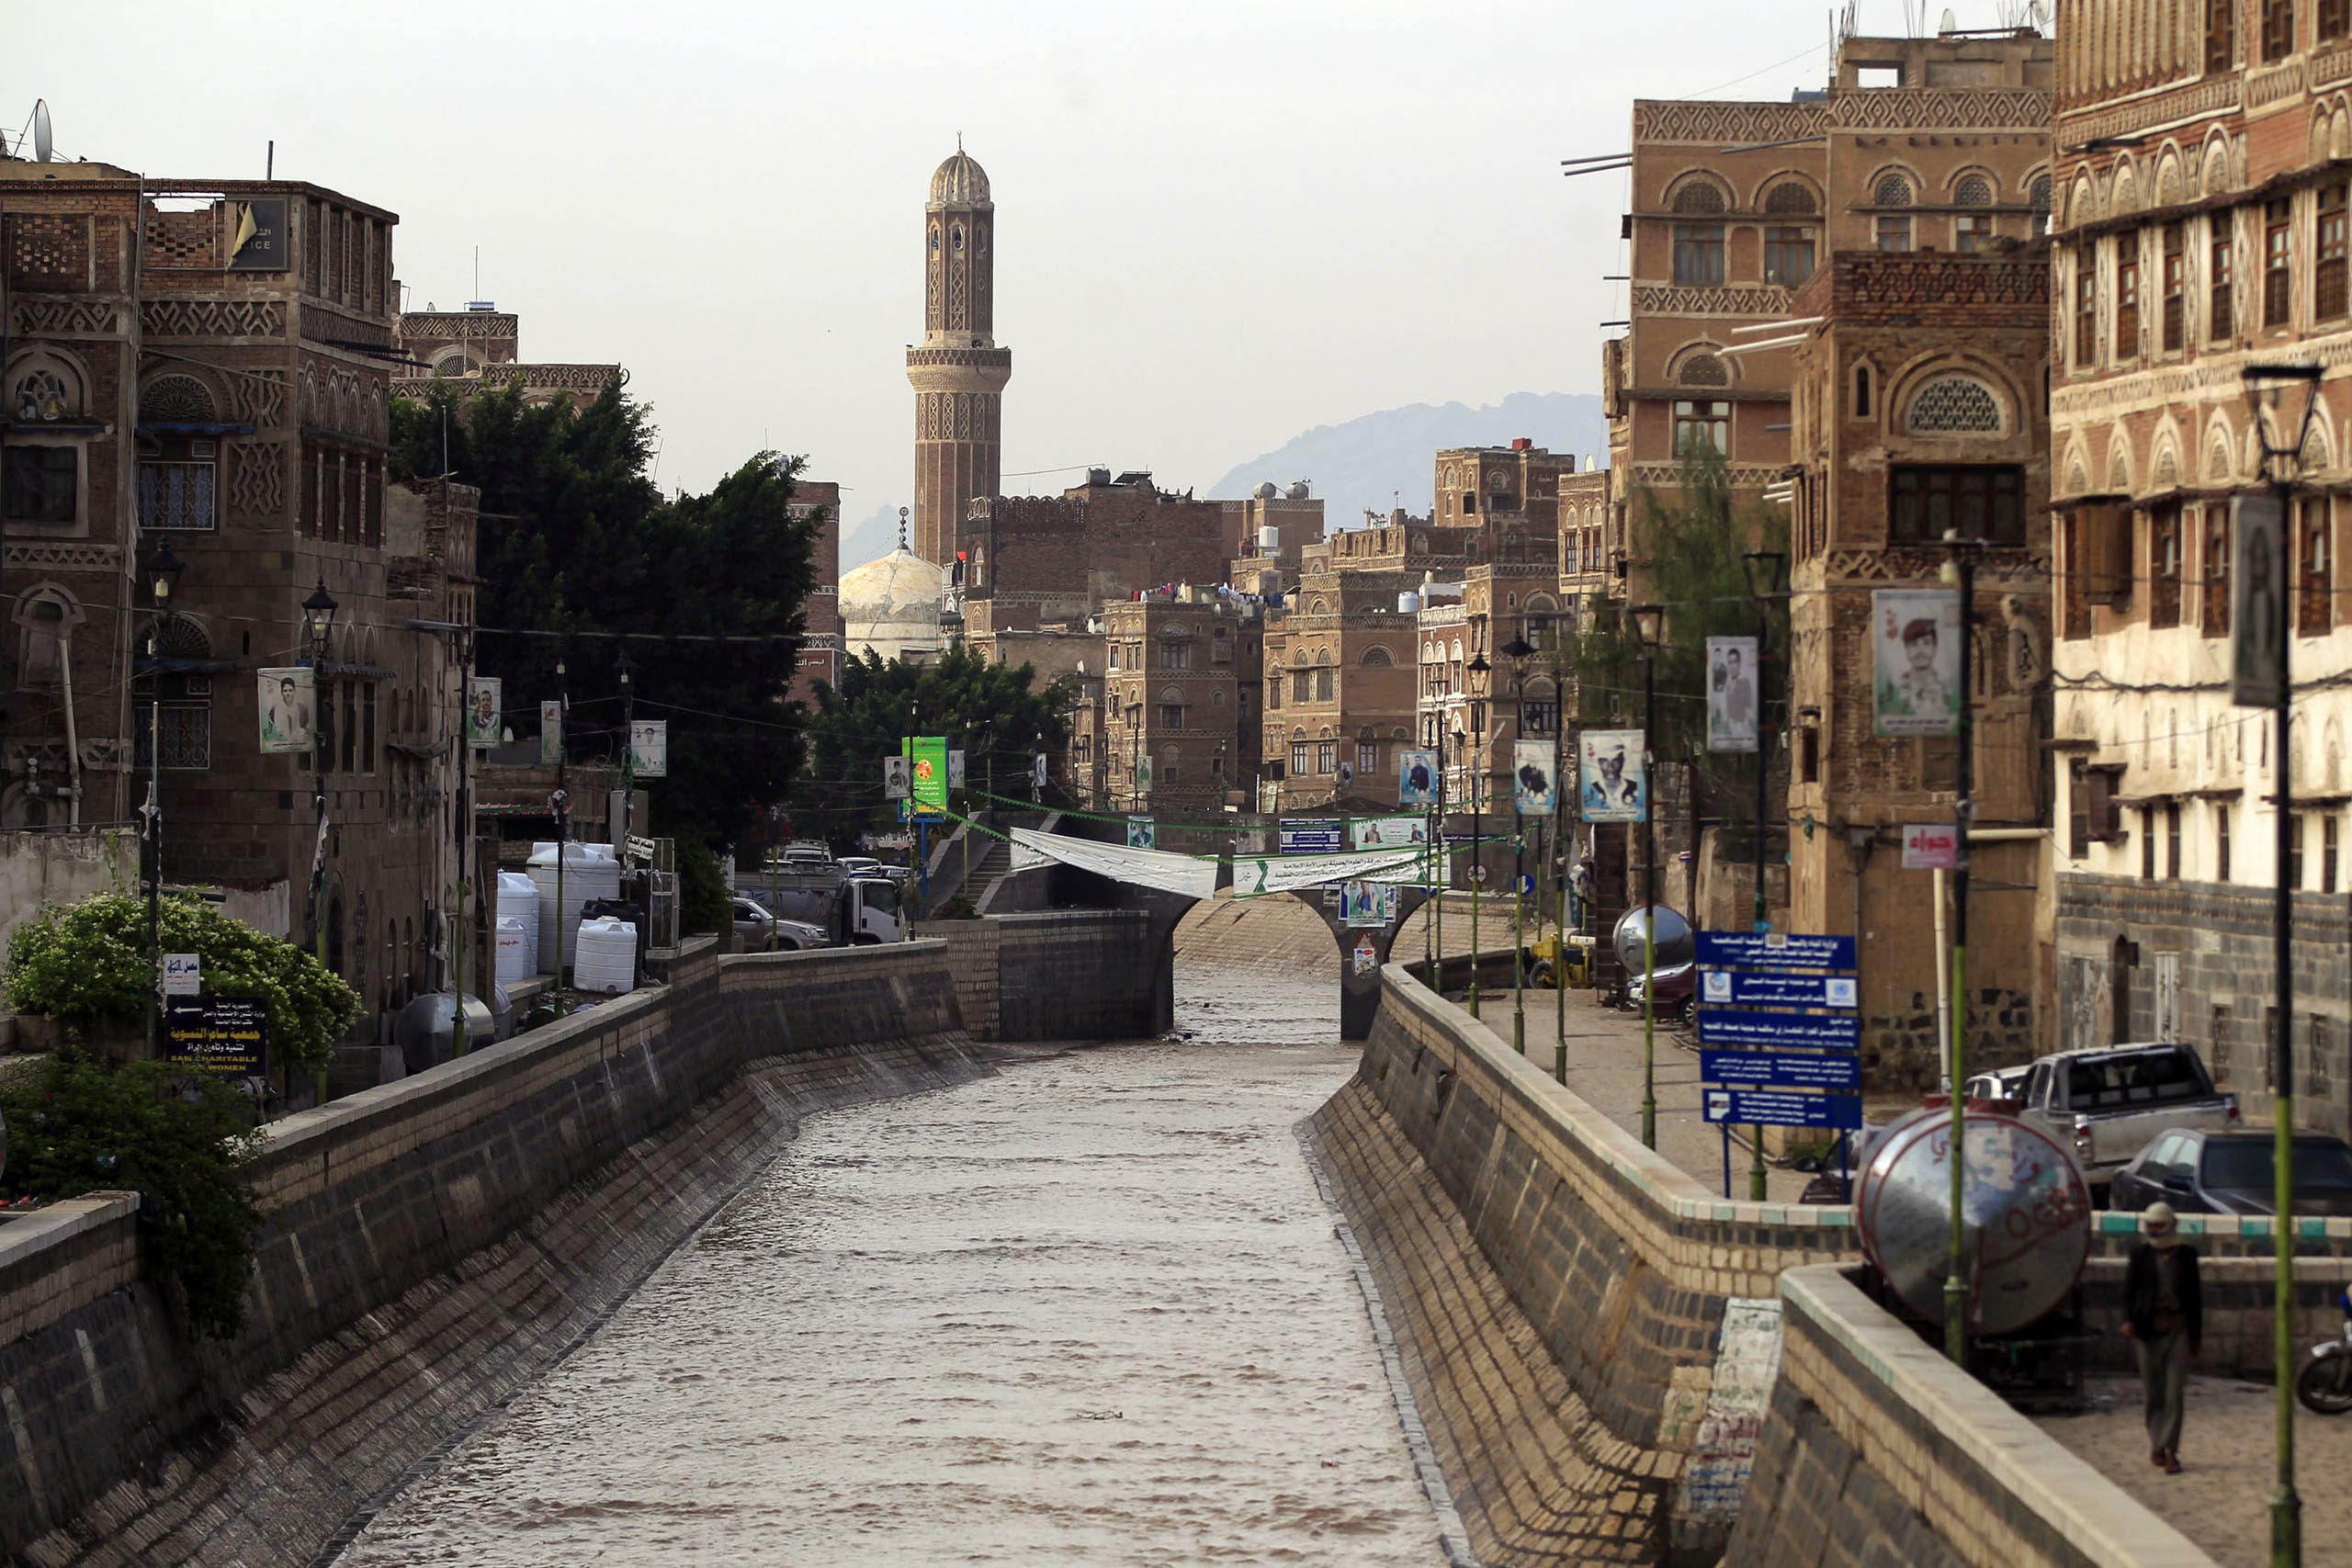 Flood water fills a canal following heavy rains in the Old City of Yemen's capital Sanaa on April 14, 2020. (AFP)